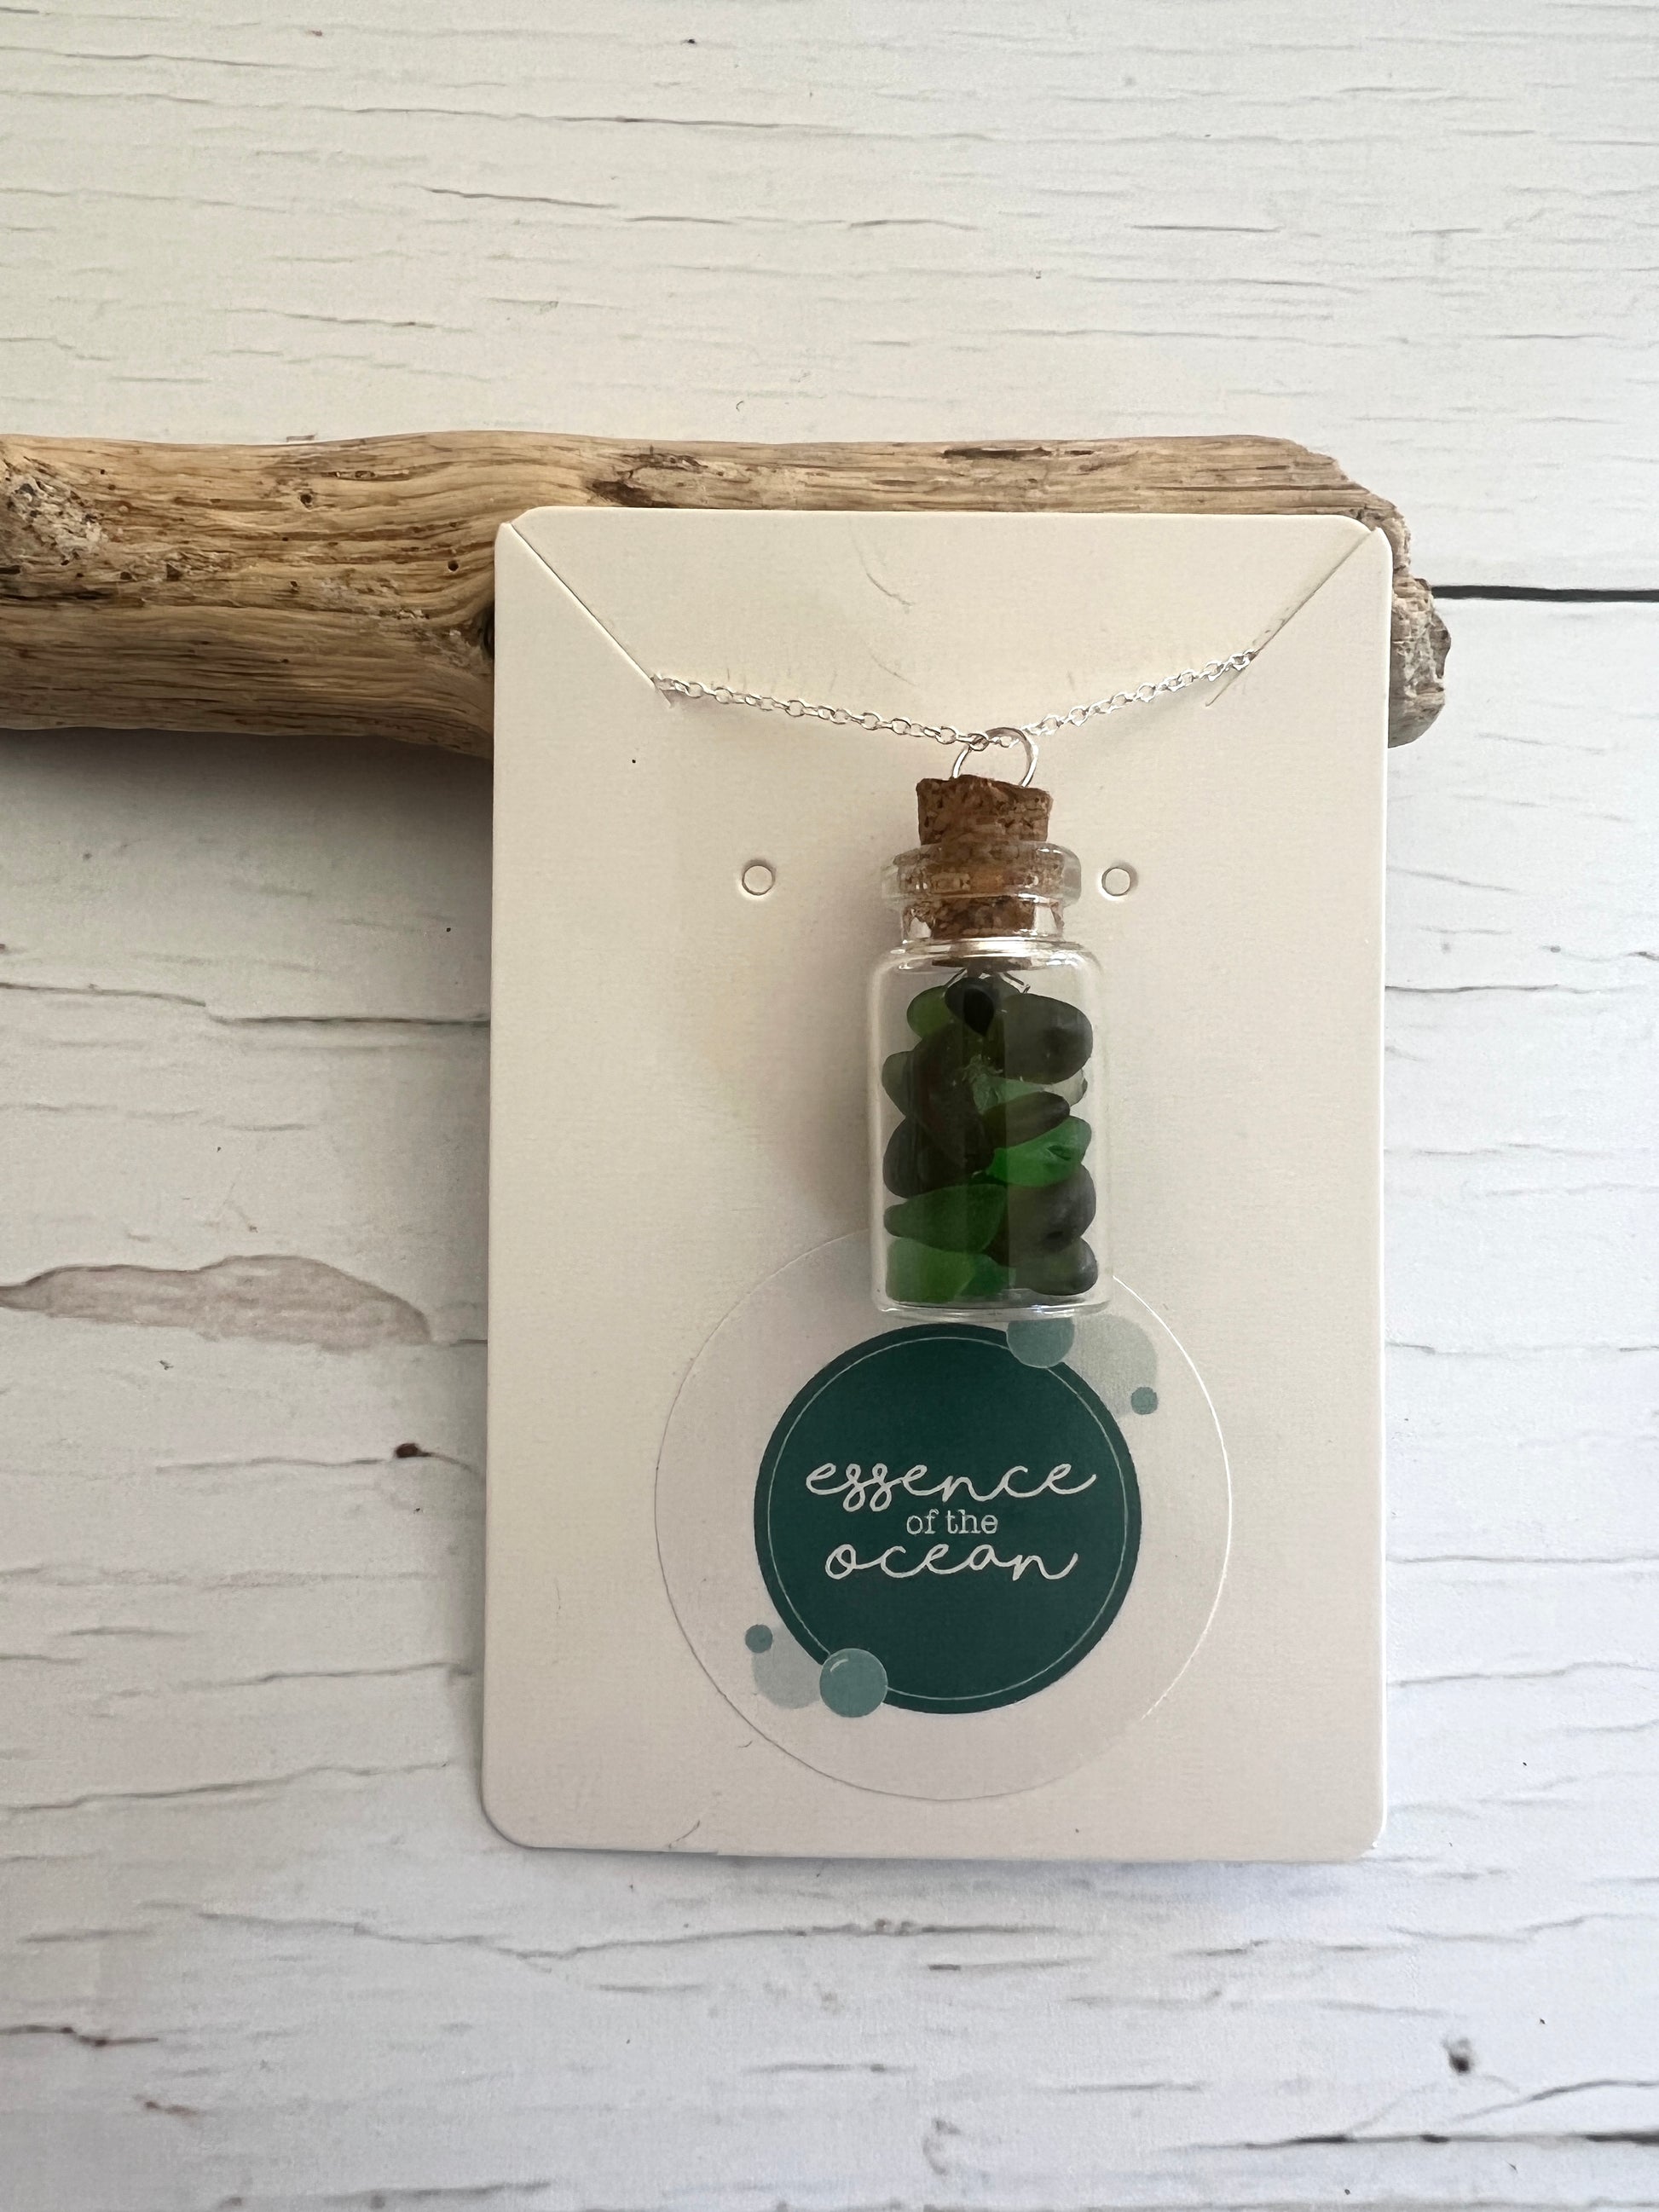 Cornish seaglass in a bottle necklace, green